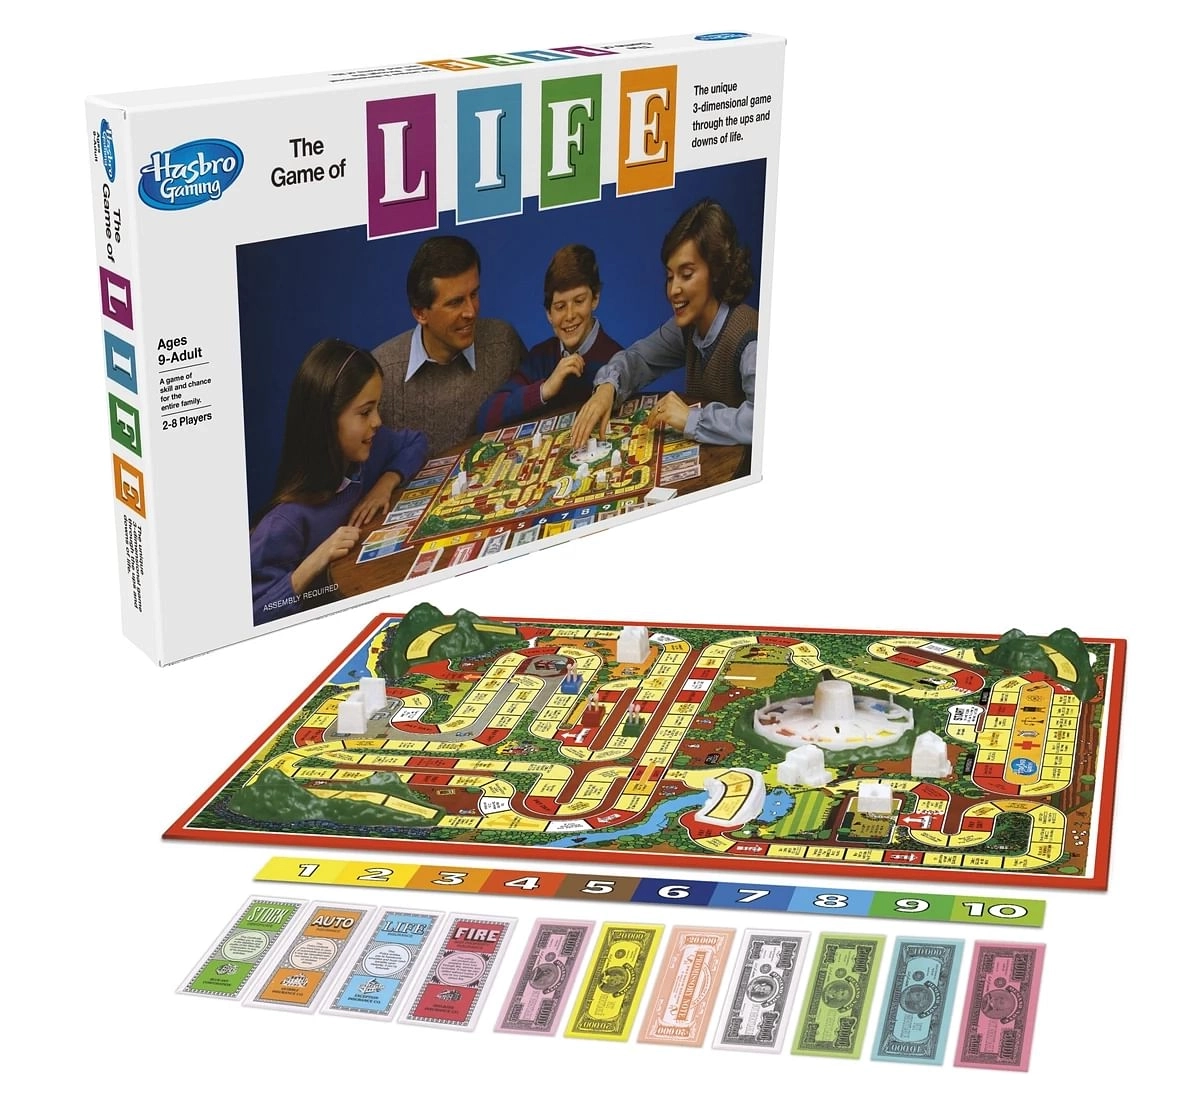 Hasbro The Game Of Life Board Game For Families and Friends 9Y+, Multicolour